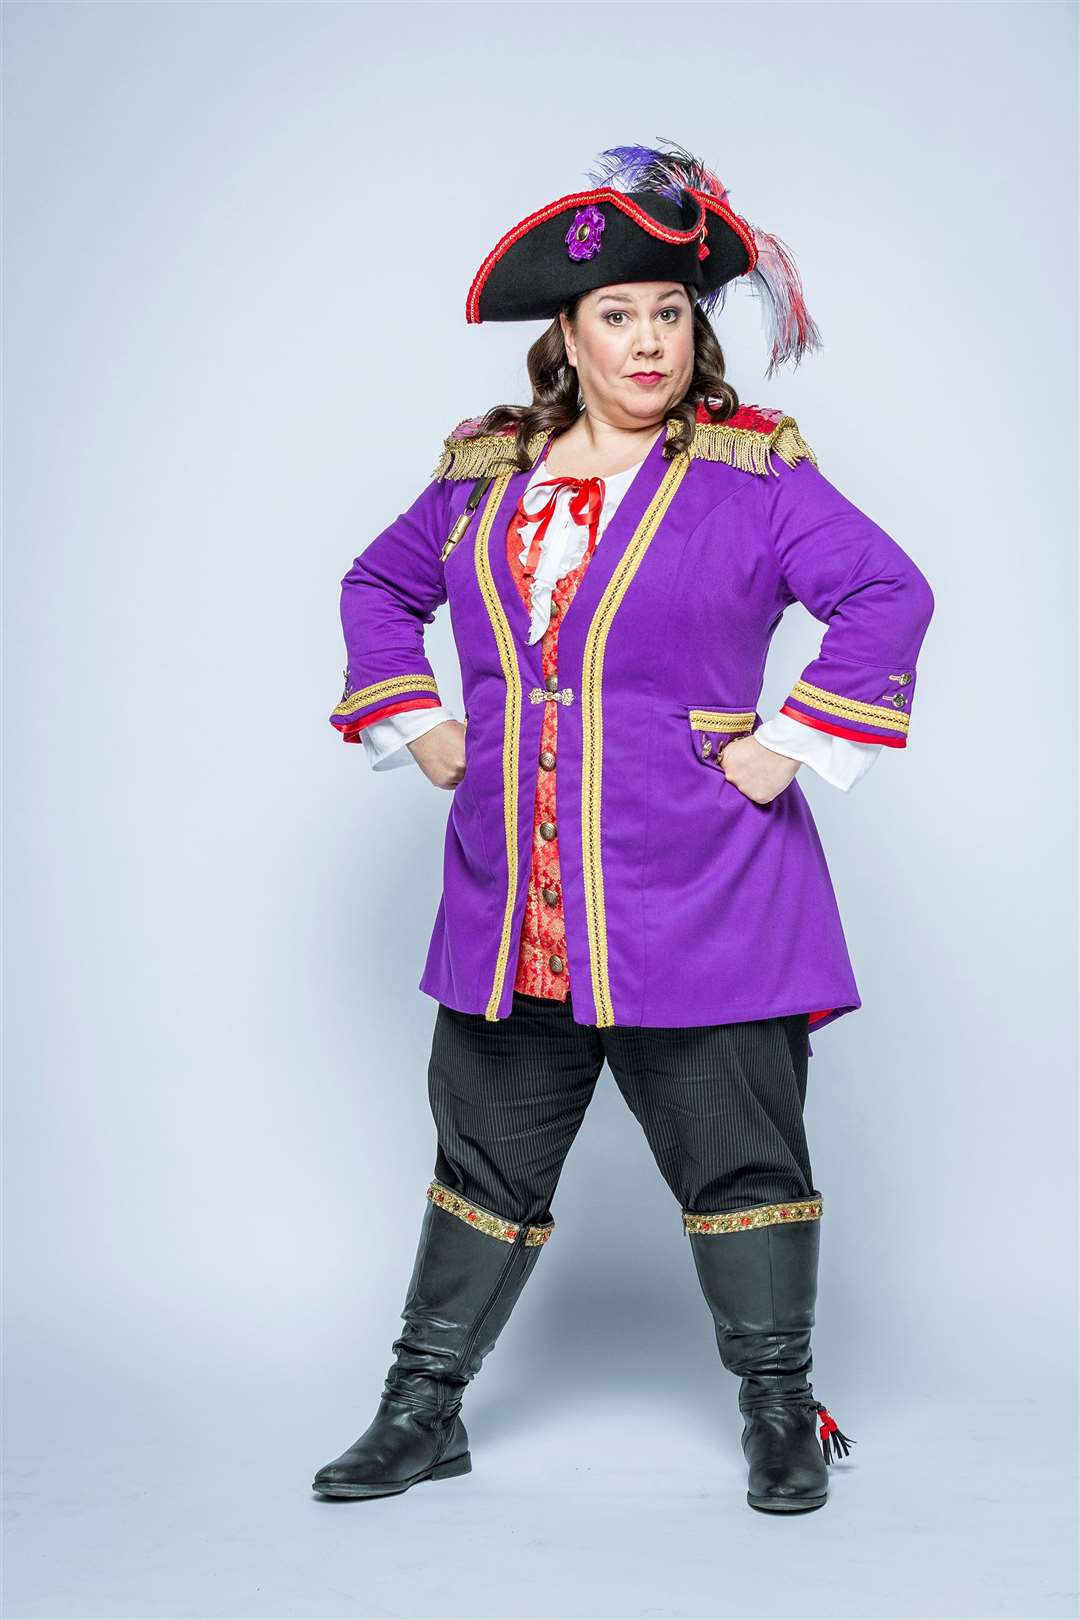 Jennie Dale, best known for playing Captain Captain the Cbeebies show Swashbuckle, will be starring as Fairy Formidable in the Chatham Central Theatre panto Beauty and the Beast. Picture: Jordan Productions